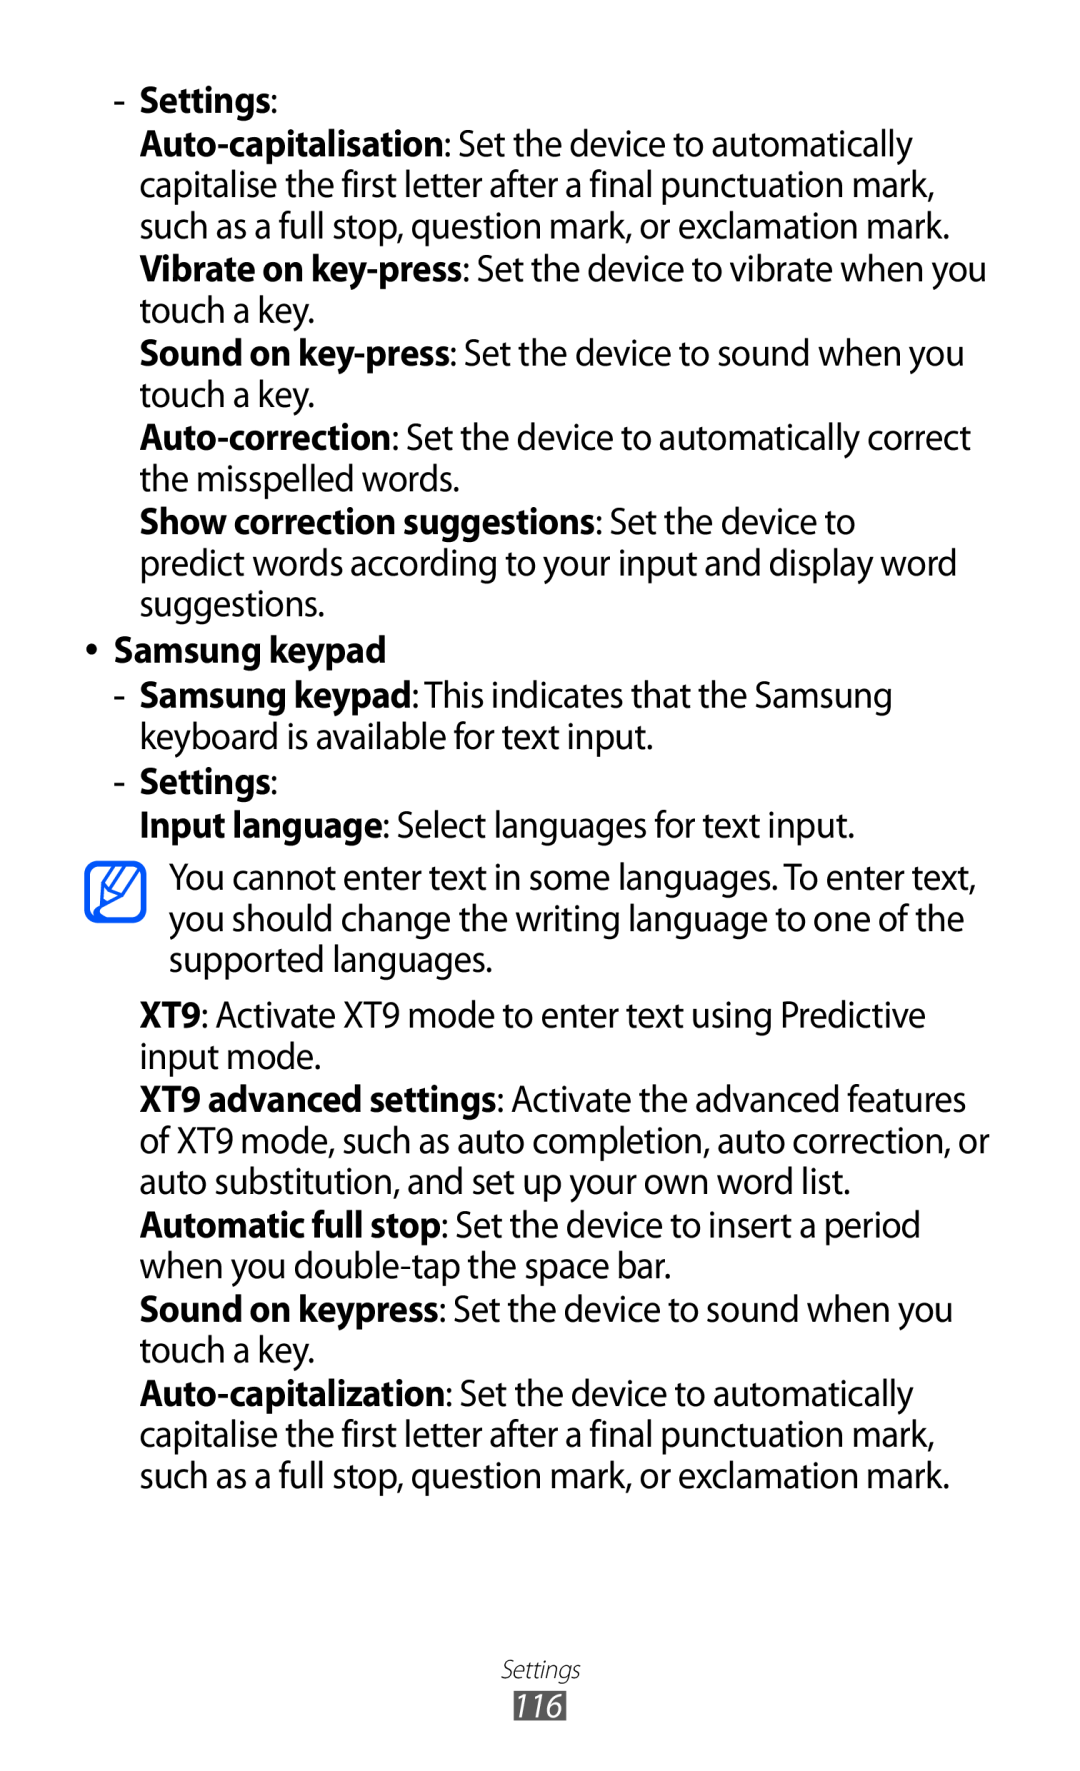 Samsung GT-P7320FKAPAN manual Samsung keypad, Settings, Sound on key-press Set the device to sound when you touch a key 